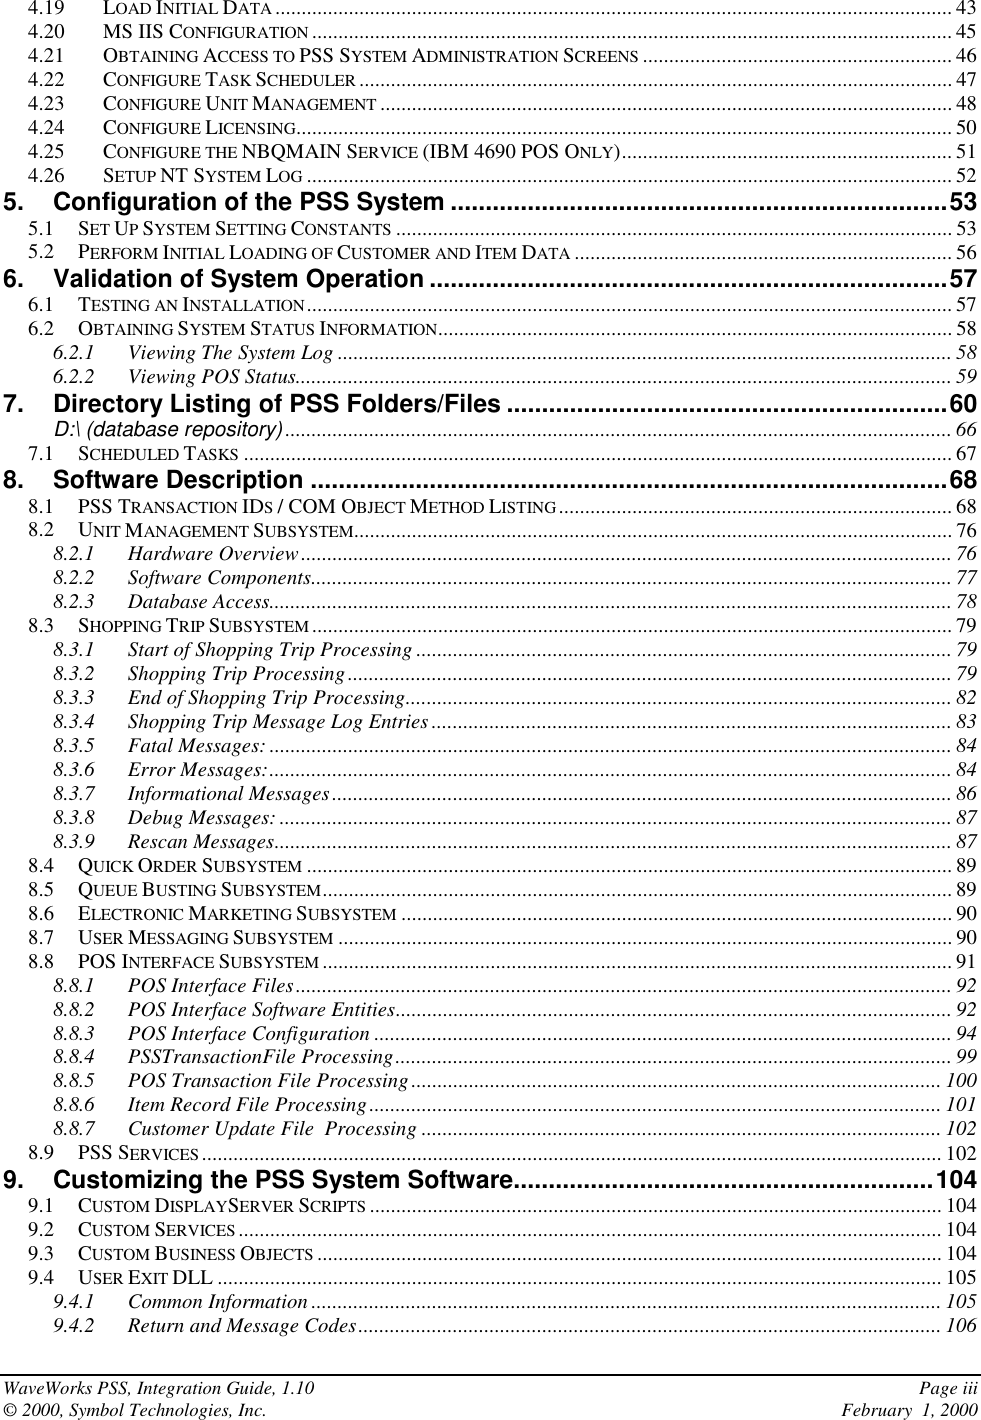 WaveWorks PSS, Integration Guide, 1.10 Page iii© 2000, Symbol Technologies, Inc. February  1, 20004.19 LOAD INITIAL DATA ................................................................................................................................. 434.20 MS IIS CONFIGURATION .......................................................................................................................... 454.21 OBTAINING ACCESS TO PSS SYSTEM ADMINISTRATION SCREENS ........................................................... 464.22 CONFIGURE TASK SCHEDULER ................................................................................................................. 474.23 CONFIGURE UNIT MANAGEMENT ............................................................................................................. 484.24 CONFIGURE LICENSING............................................................................................................................. 504.25 CONFIGURE THE NBQMAIN SERVICE (IBM 4690 POS ONLY)............................................................... 514.26 SETUP NT SYSTEM LOG ........................................................................................................................... 525. Configuration of the PSS System .......................................................................535.1 SET UP SYSTEM SETTING CONSTANTS .......................................................................................................... 535.2 PERFORM INITIAL LOADING OF CUSTOMER AND ITEM DATA ........................................................................ 566. Validation of System Operation ..........................................................................576.1 TESTING AN INSTALLATION........................................................................................................................... 576.2 OBTAINING SYSTEM STATUS INFORMATION.................................................................................................. 586.2.1 Viewing The System Log ..................................................................................................................... 586.2.2 Viewing POS Status............................................................................................................................. 597. Directory Listing of PSS Folders/Files ...............................................................60D:\ (database repository) ............................................................................................................................... 667.1 SCHEDULED TASKS ....................................................................................................................................... 678. Software Description ...........................................................................................688.1 PSS TRANSACTION IDS / COM OBJECT METHOD LISTING........................................................................... 688.2 UNIT MANAGEMENT SUBSYSTEM.................................................................................................................. 768.2.1 Hardware Overview............................................................................................................................ 768.2.2 Software Components.......................................................................................................................... 778.2.3 Database Access.................................................................................................................................. 788.3 SHOPPING TRIP SUBSYSTEM .......................................................................................................................... 798.3.1 Start of Shopping Trip Processing ...................................................................................................... 798.3.2 Shopping Trip Processing................................................................................................................... 798.3.3 End of Shopping Trip Processing........................................................................................................ 828.3.4 Shopping Trip Message Log Entries................................................................................................... 838.3.5 Fatal Messages: .................................................................................................................................. 848.3.6 Error Messages:.................................................................................................................................. 848.3.7 Informational Messages...................................................................................................................... 868.3.8 Debug Messages: ................................................................................................................................ 878.3.9 Rescan Messages................................................................................................................................. 878.4 QUICK ORDER SUBSYSTEM ........................................................................................................................... 898.5 QUEUE BUSTING SUBSYSTEM........................................................................................................................ 898.6 ELECTRONIC MARKETING SUBSYSTEM ......................................................................................................... 908.7 USER MESSAGING SUBSYSTEM ..................................................................................................................... 908.8 POS INTERFACE SUBSYSTEM ........................................................................................................................ 918.8.1 POS Interface Files............................................................................................................................. 928.8.2 POS Interface Software Entities.......................................................................................................... 928.8.3 POS Interface Configuration .............................................................................................................. 948.8.4 PSSTransactionFile Processing.......................................................................................................... 998.8.5 POS Transaction File Processing..................................................................................................... 1008.8.6 Item Record File Processing............................................................................................................. 1018.8.7 Customer Update File  Processing ................................................................................................... 1028.9 PSS SERVICES............................................................................................................................................. 1029. Customizing the PSS System Software............................................................1049.1 CUSTOM DISPLAYSERVER SCRIPTS ............................................................................................................. 1049.2 CUSTOM SERVICES ...................................................................................................................................... 1049.3 CUSTOM BUSINESS OBJECTS ....................................................................................................................... 1049.4 USER EXIT DLL .......................................................................................................................................... 1059.4.1 Common Information ........................................................................................................................ 1059.4.2 Return and Message Codes............................................................................................................... 106